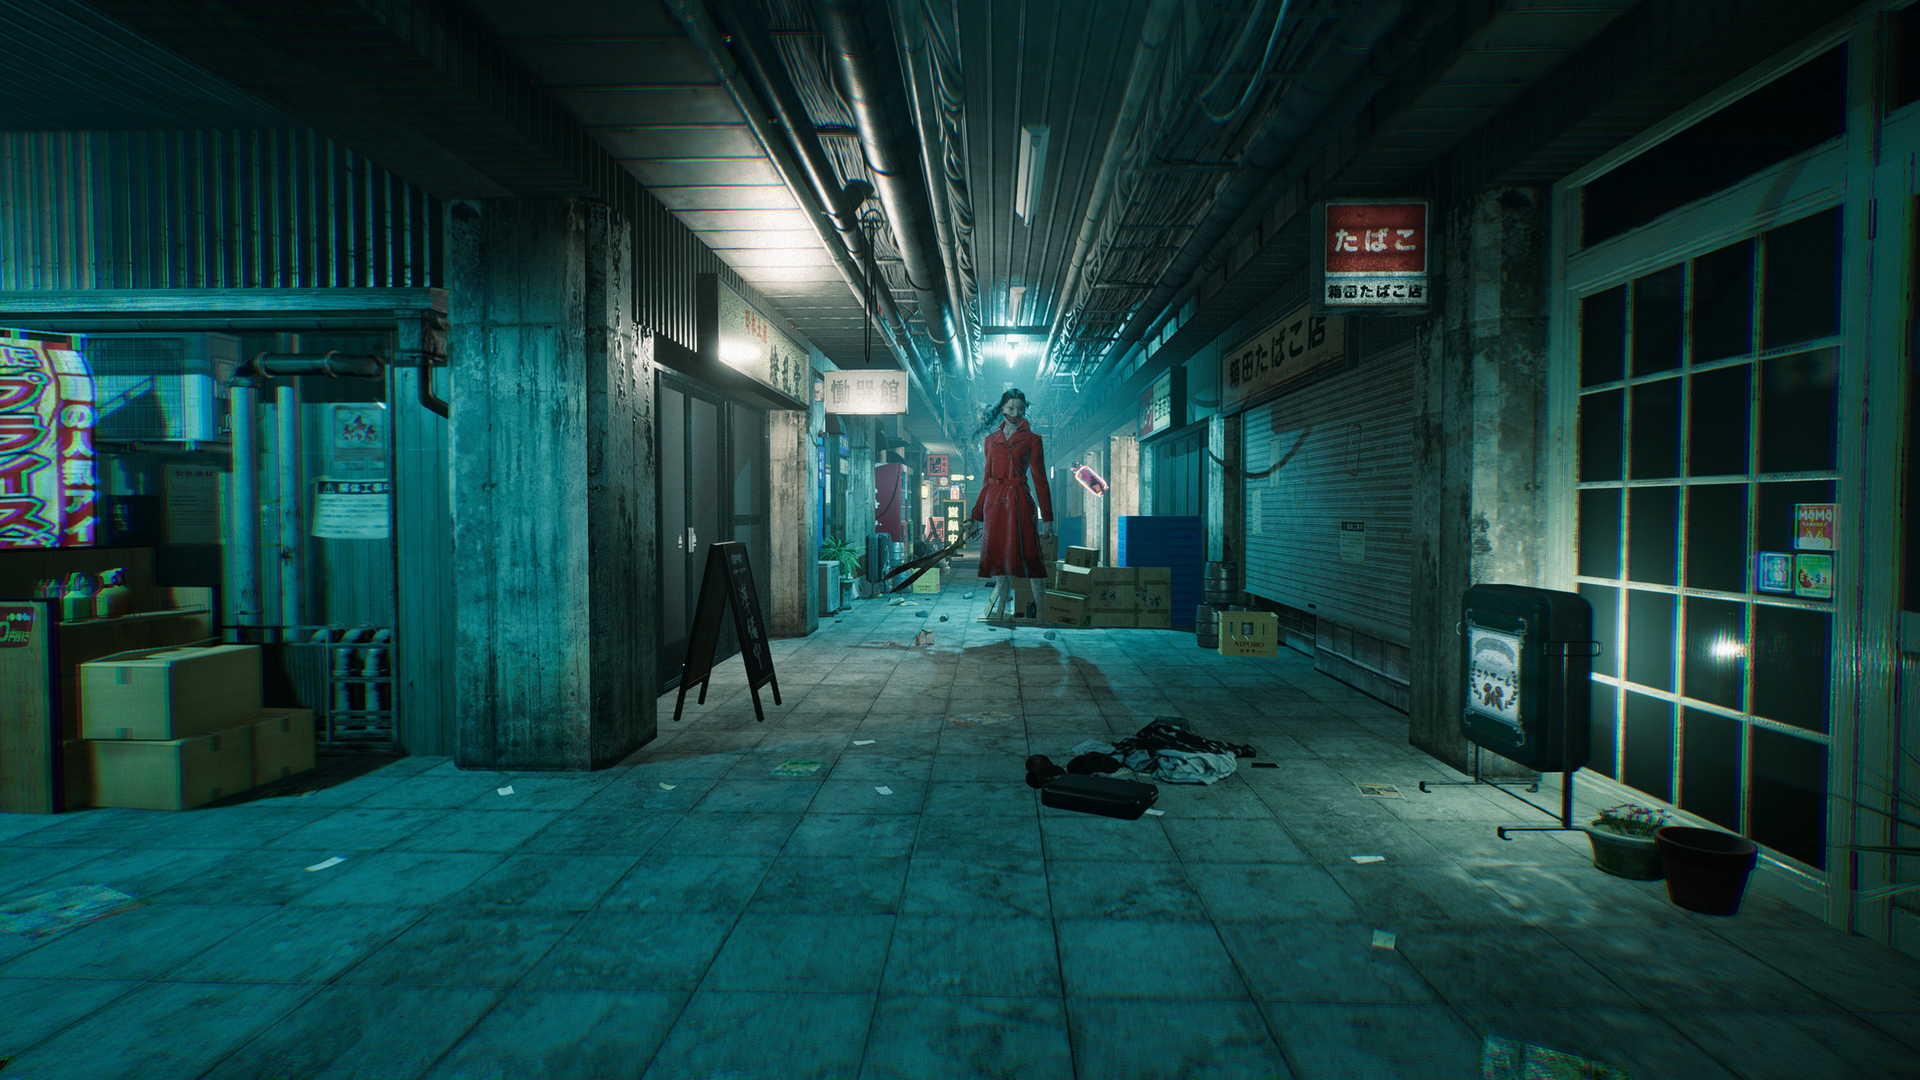 Screencap of an animated scene showing a person standing in a dark alleyway